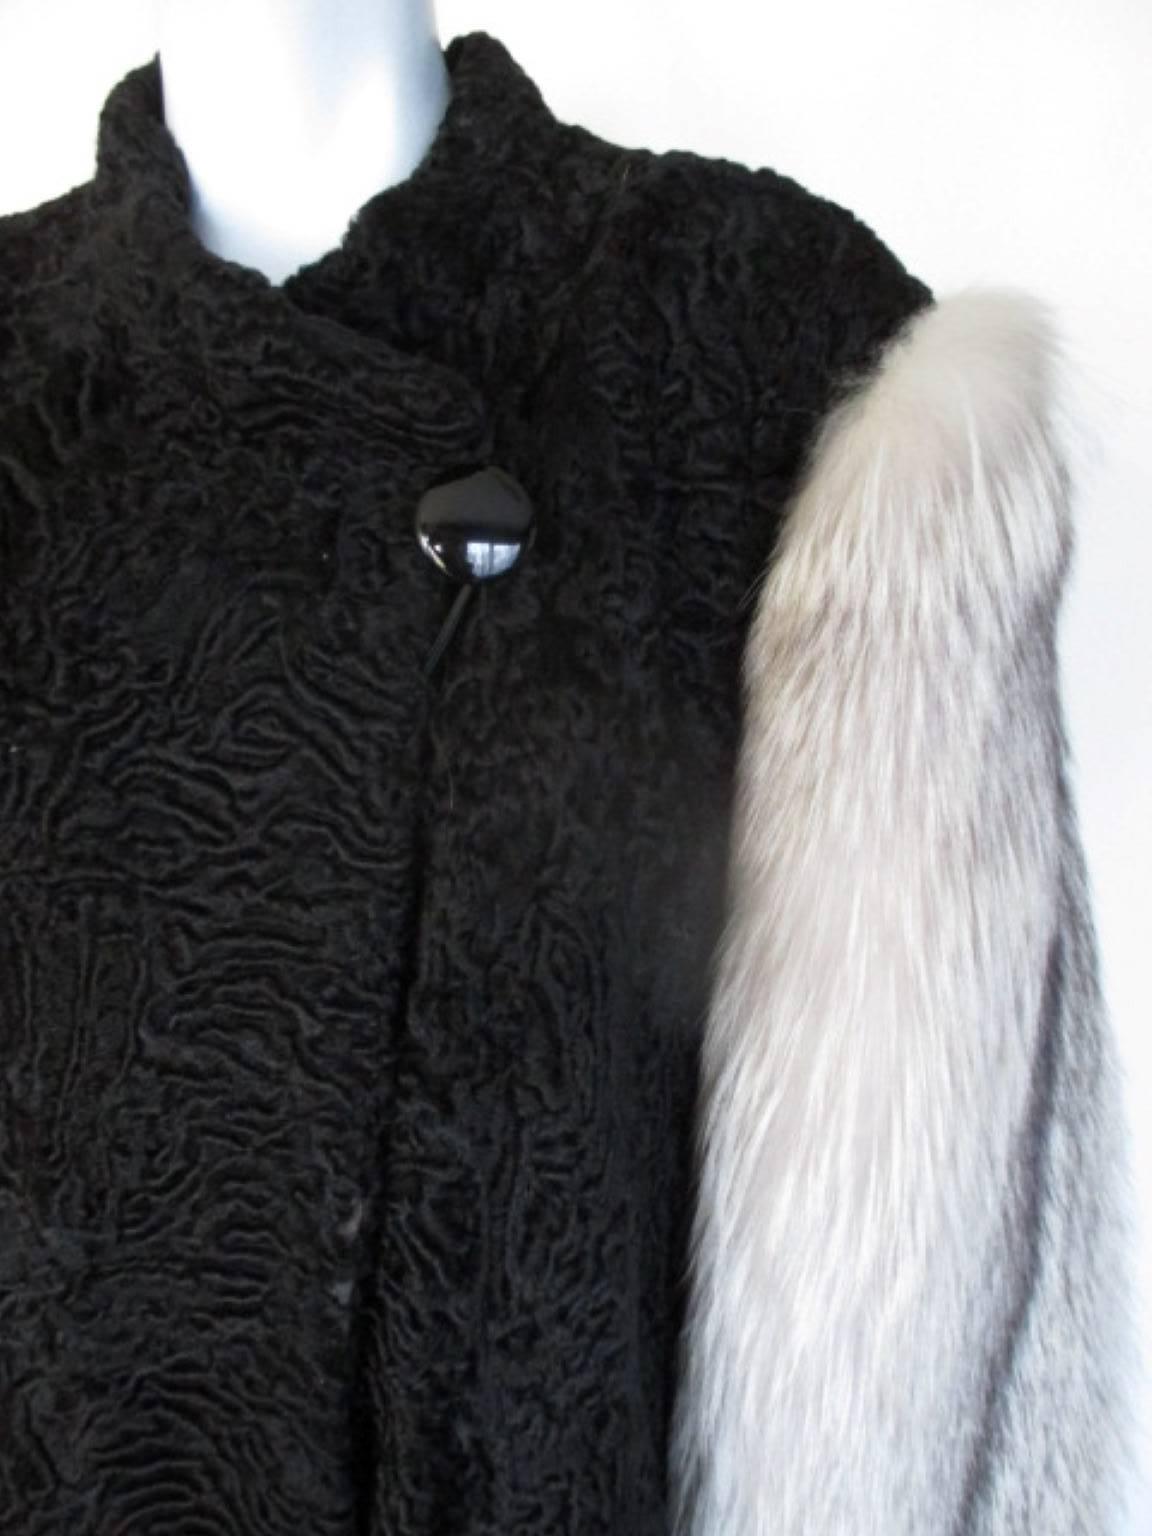 Black persian lamb with artic fox fur sleeves.

We offer more Persian lamb fur items, view our frontstore.

Details:
This vintage coat in Art-Deco style has 1 closing button, 4 closing hooks and 2 outside pockets.
Its in good pre-owned condition